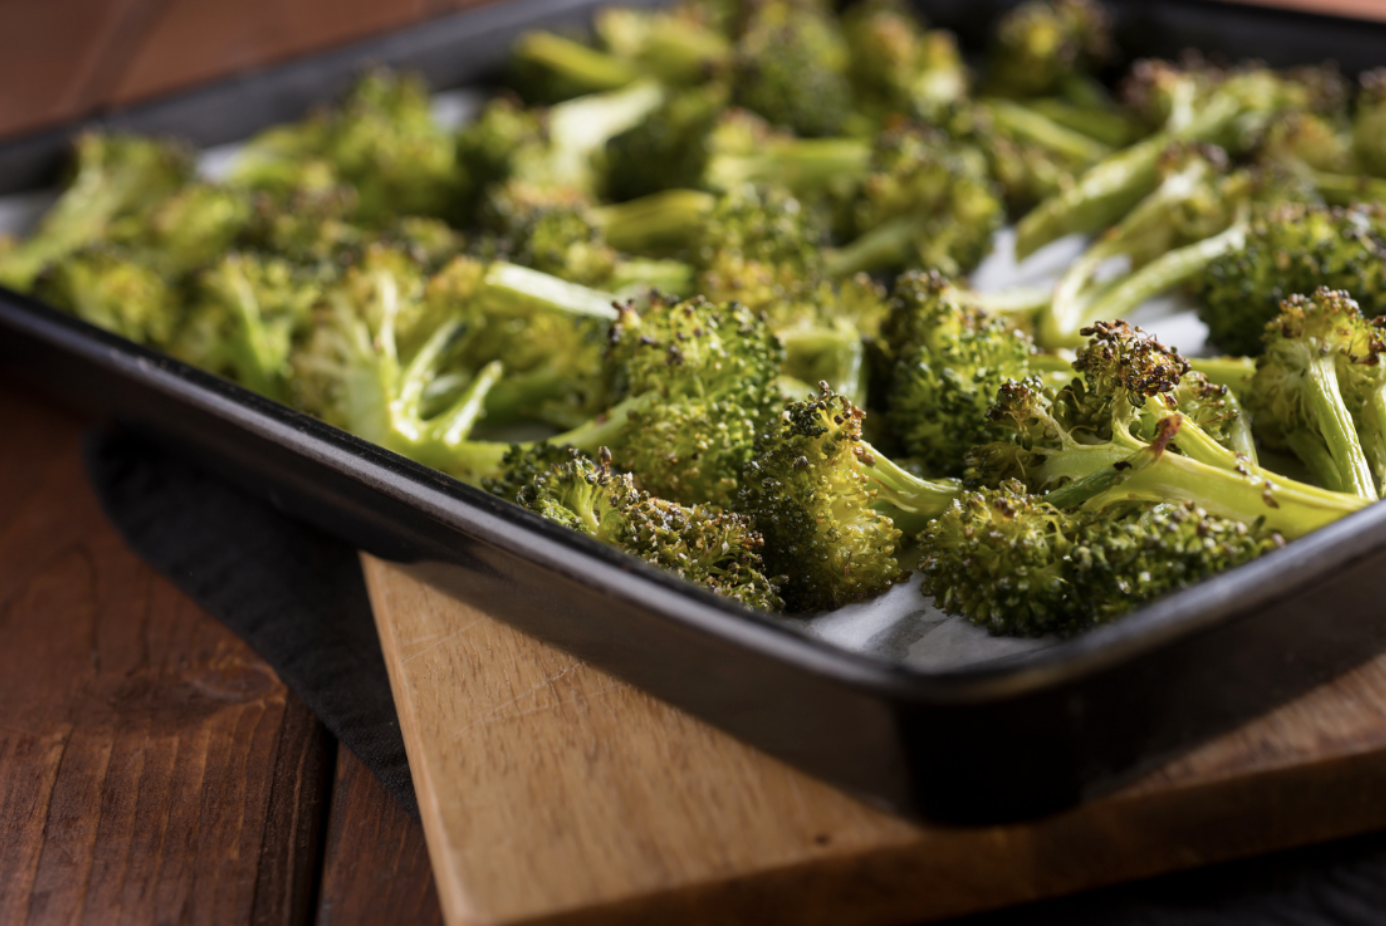 Green Goodness: Fun Facts About Broccoli